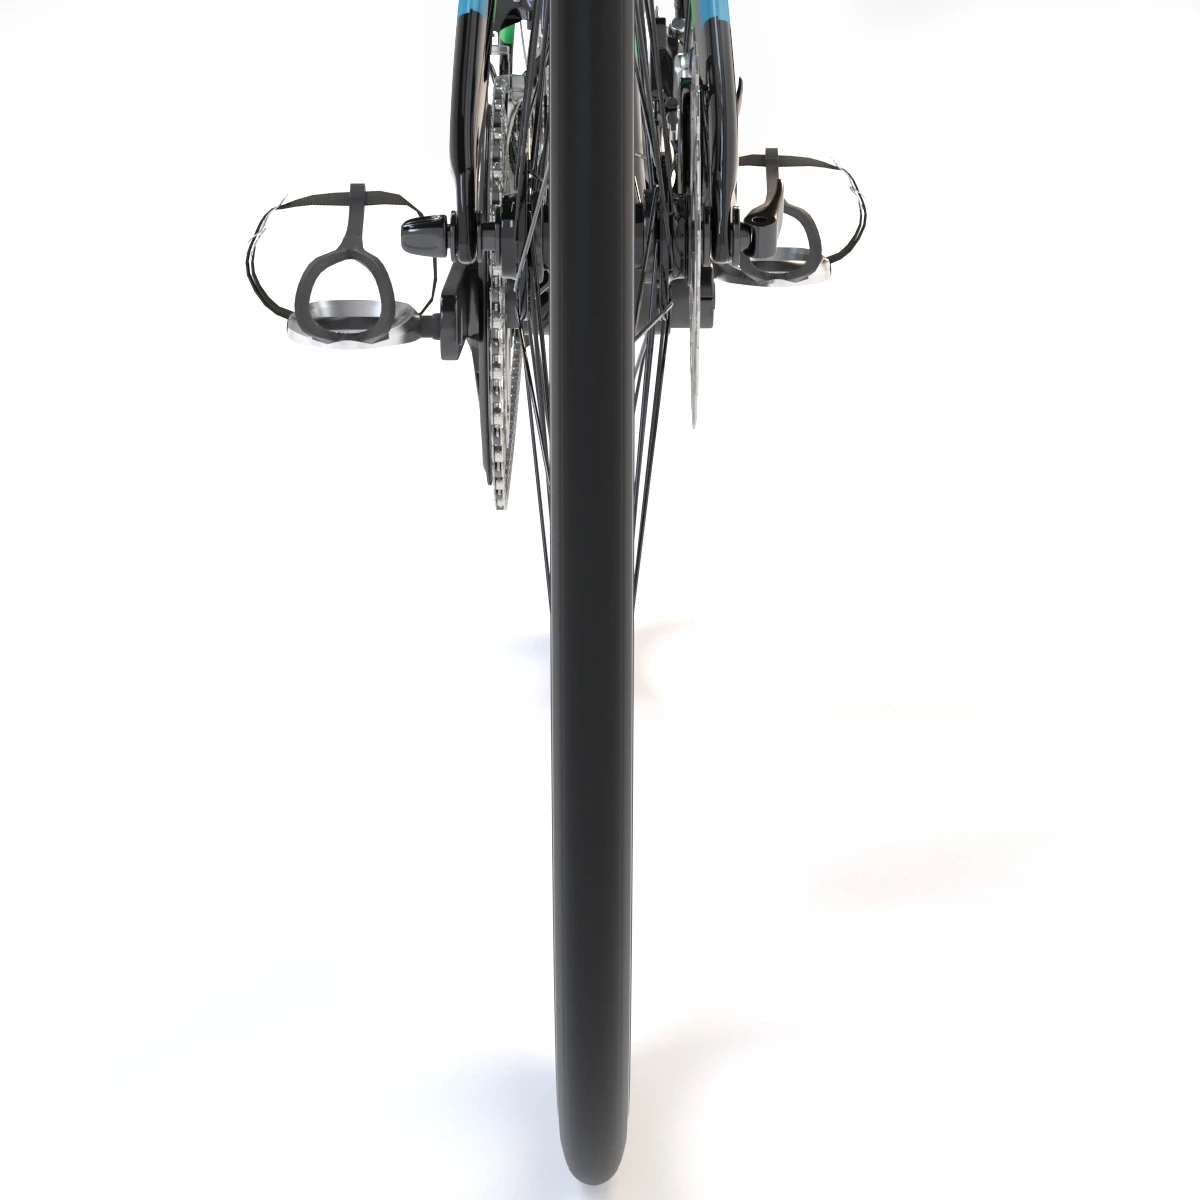 Giant Fastroad Cm1 Black Bicycle 3D Model_015